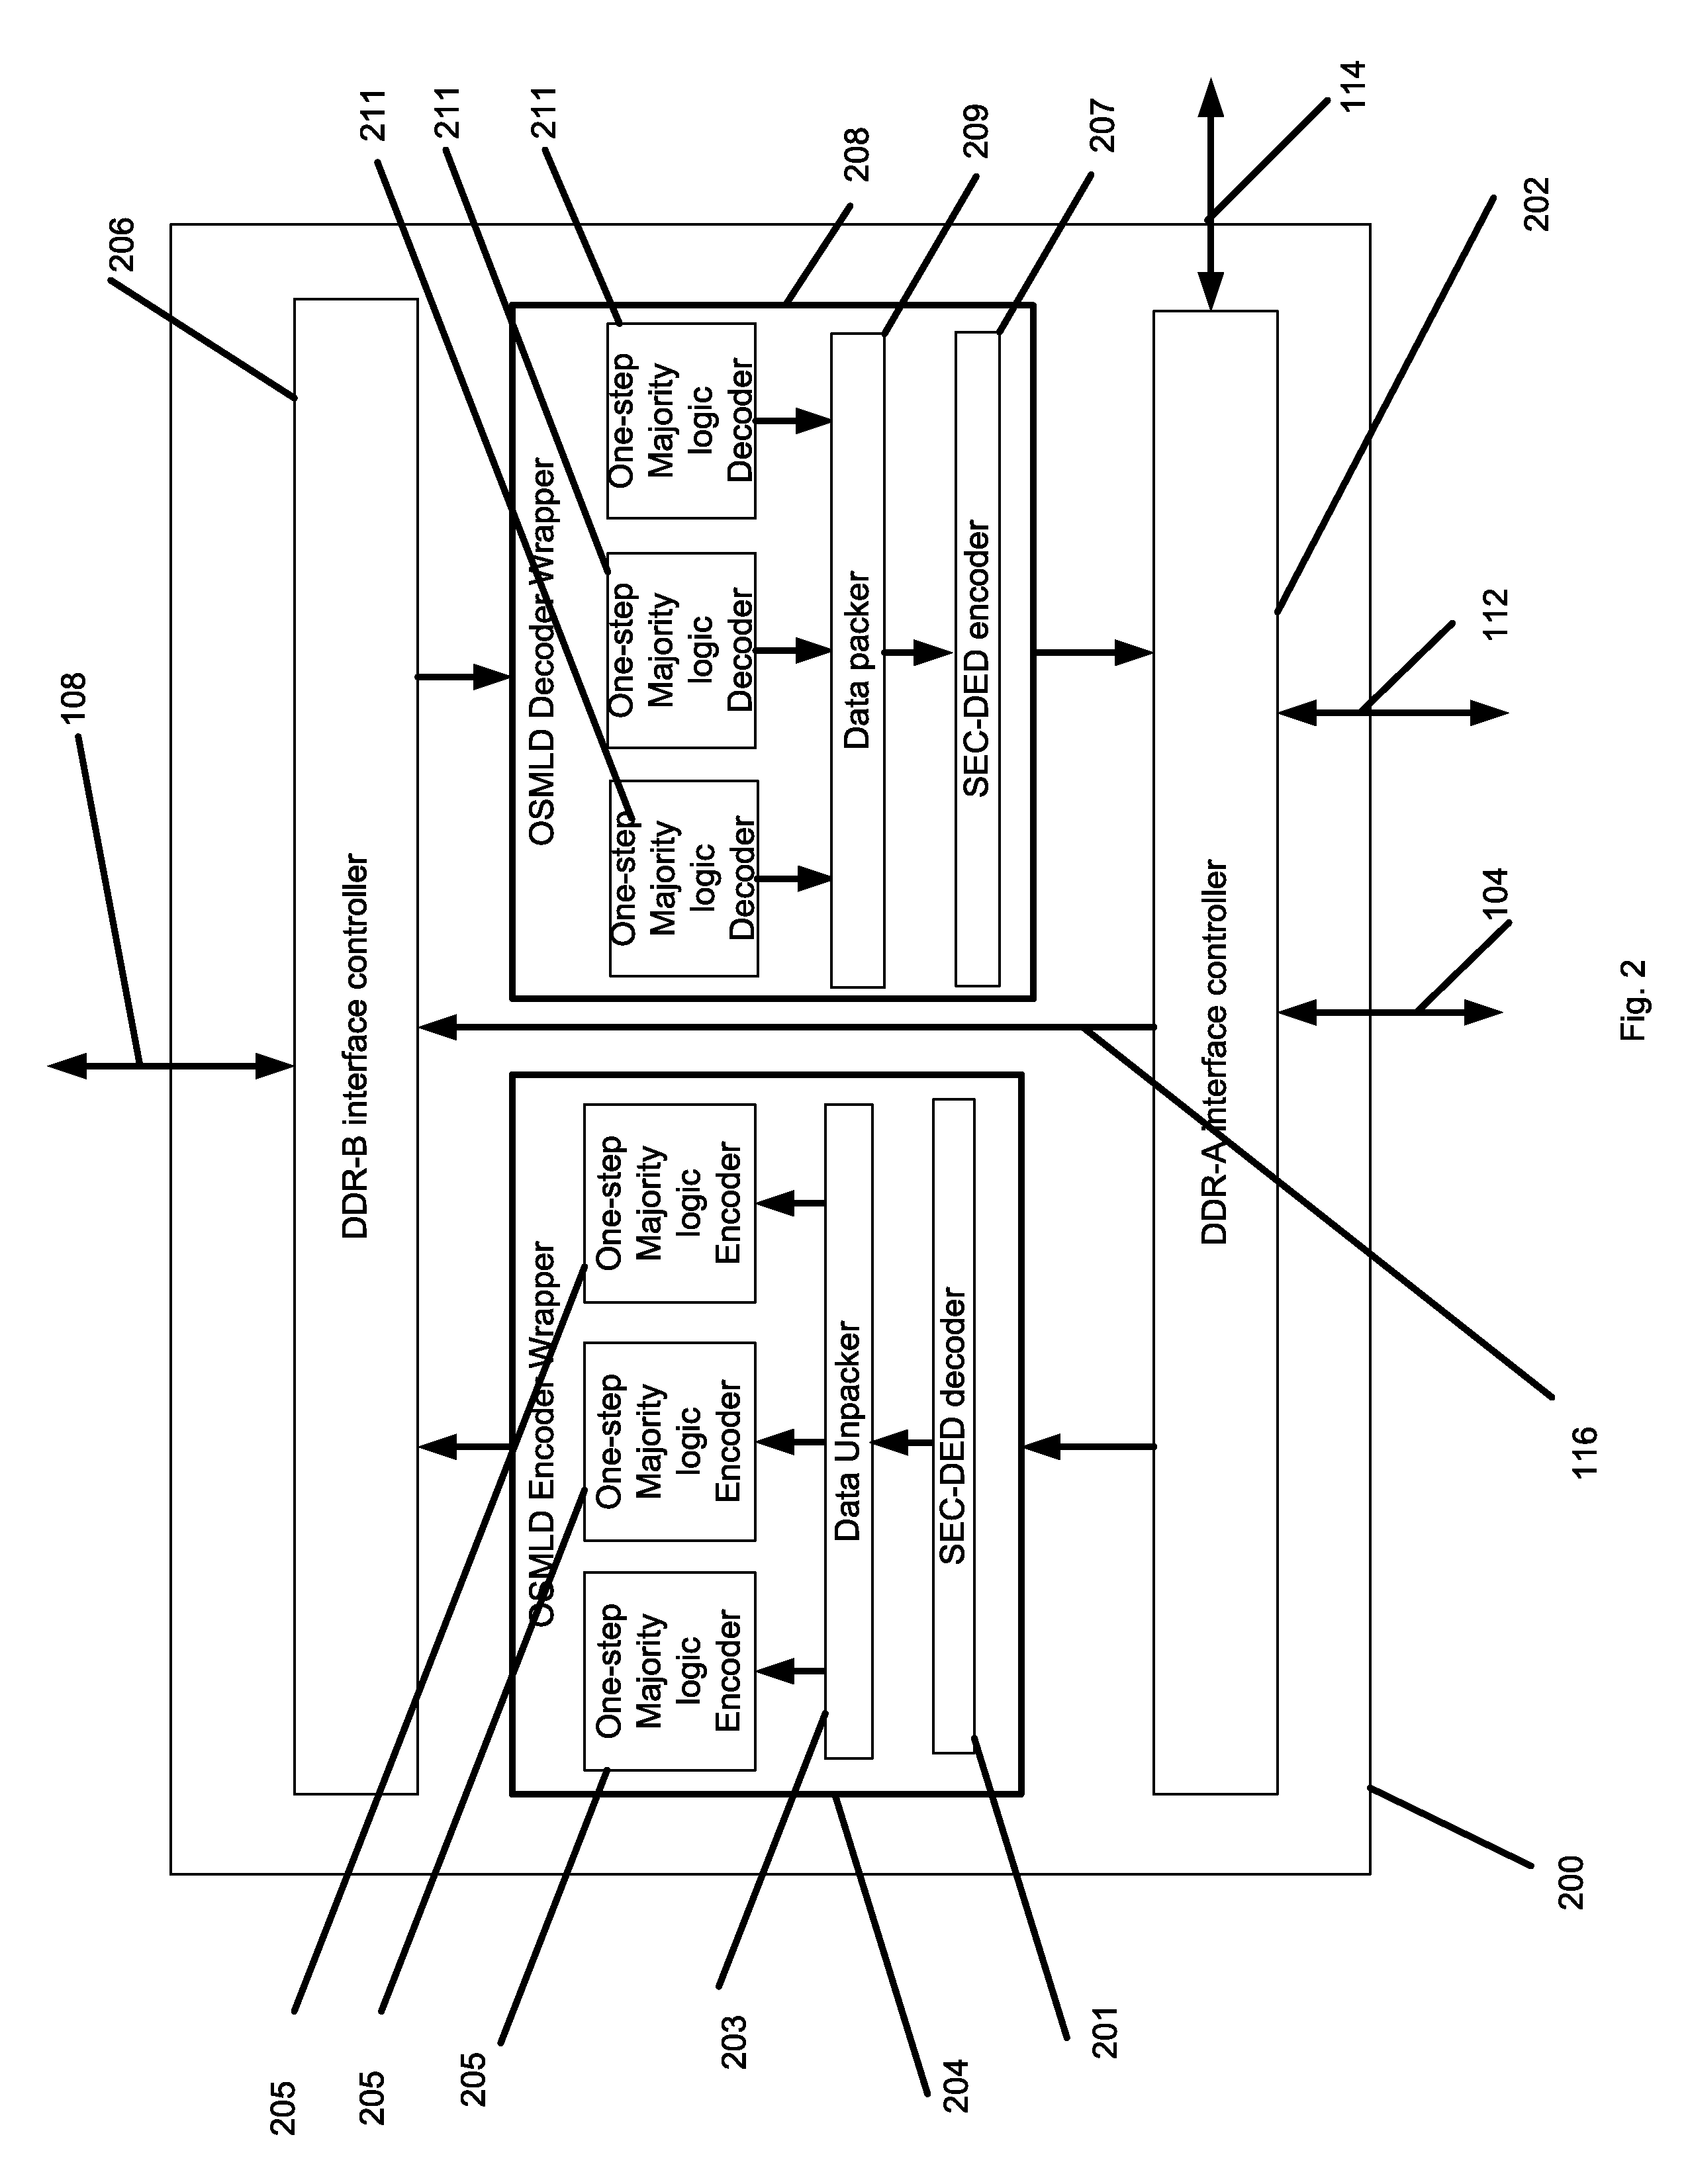 Dual data rate bridge controller with one-step majority logic decodable codes for multiple bit error corrections with low latency